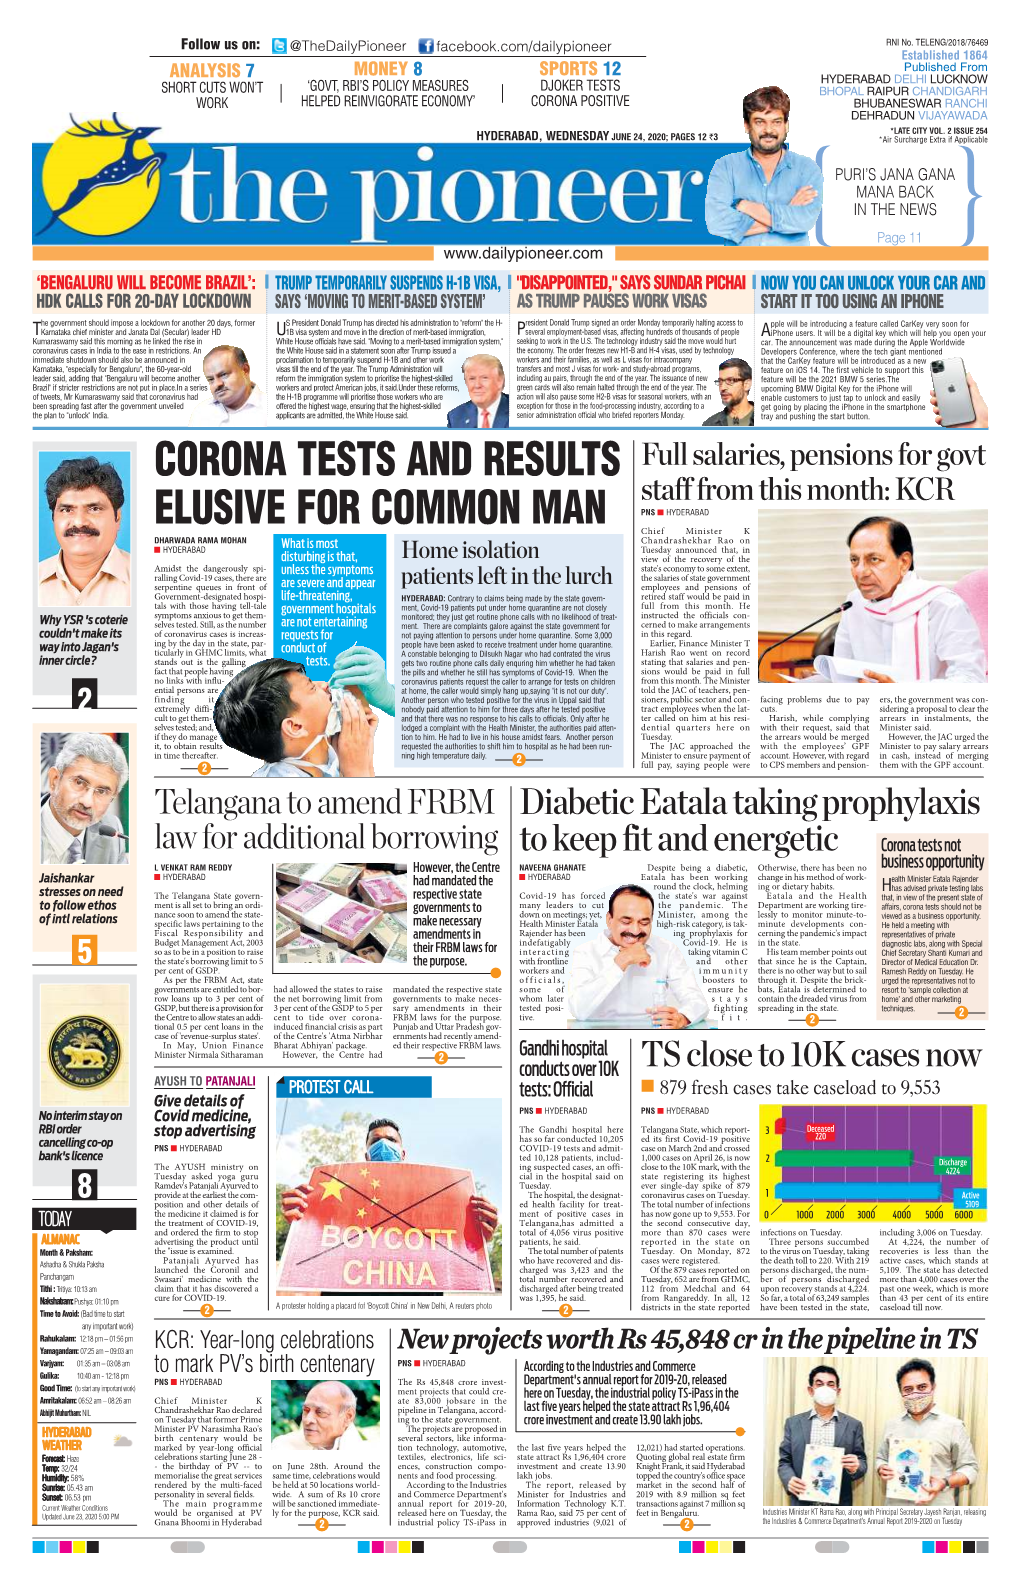 Corona Tests and Results Elusive for Common